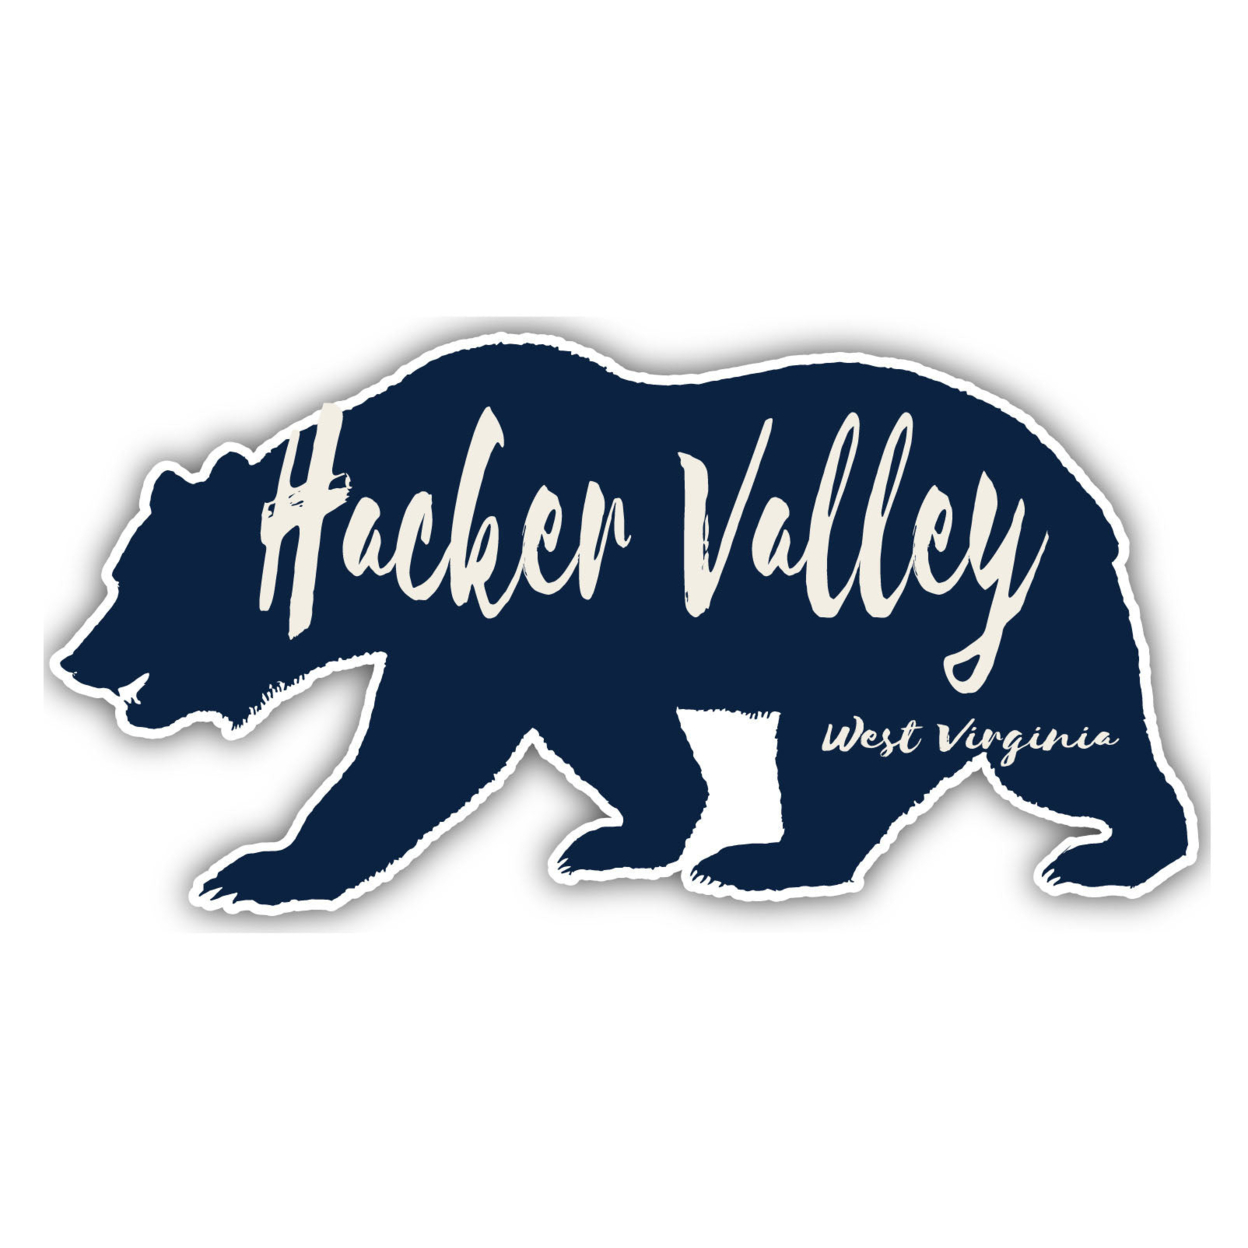 Hacker Valley West Virginia Souvenir Decorative Stickers (Choose Theme And Size) - 4-Pack, 2-Inch, Bear